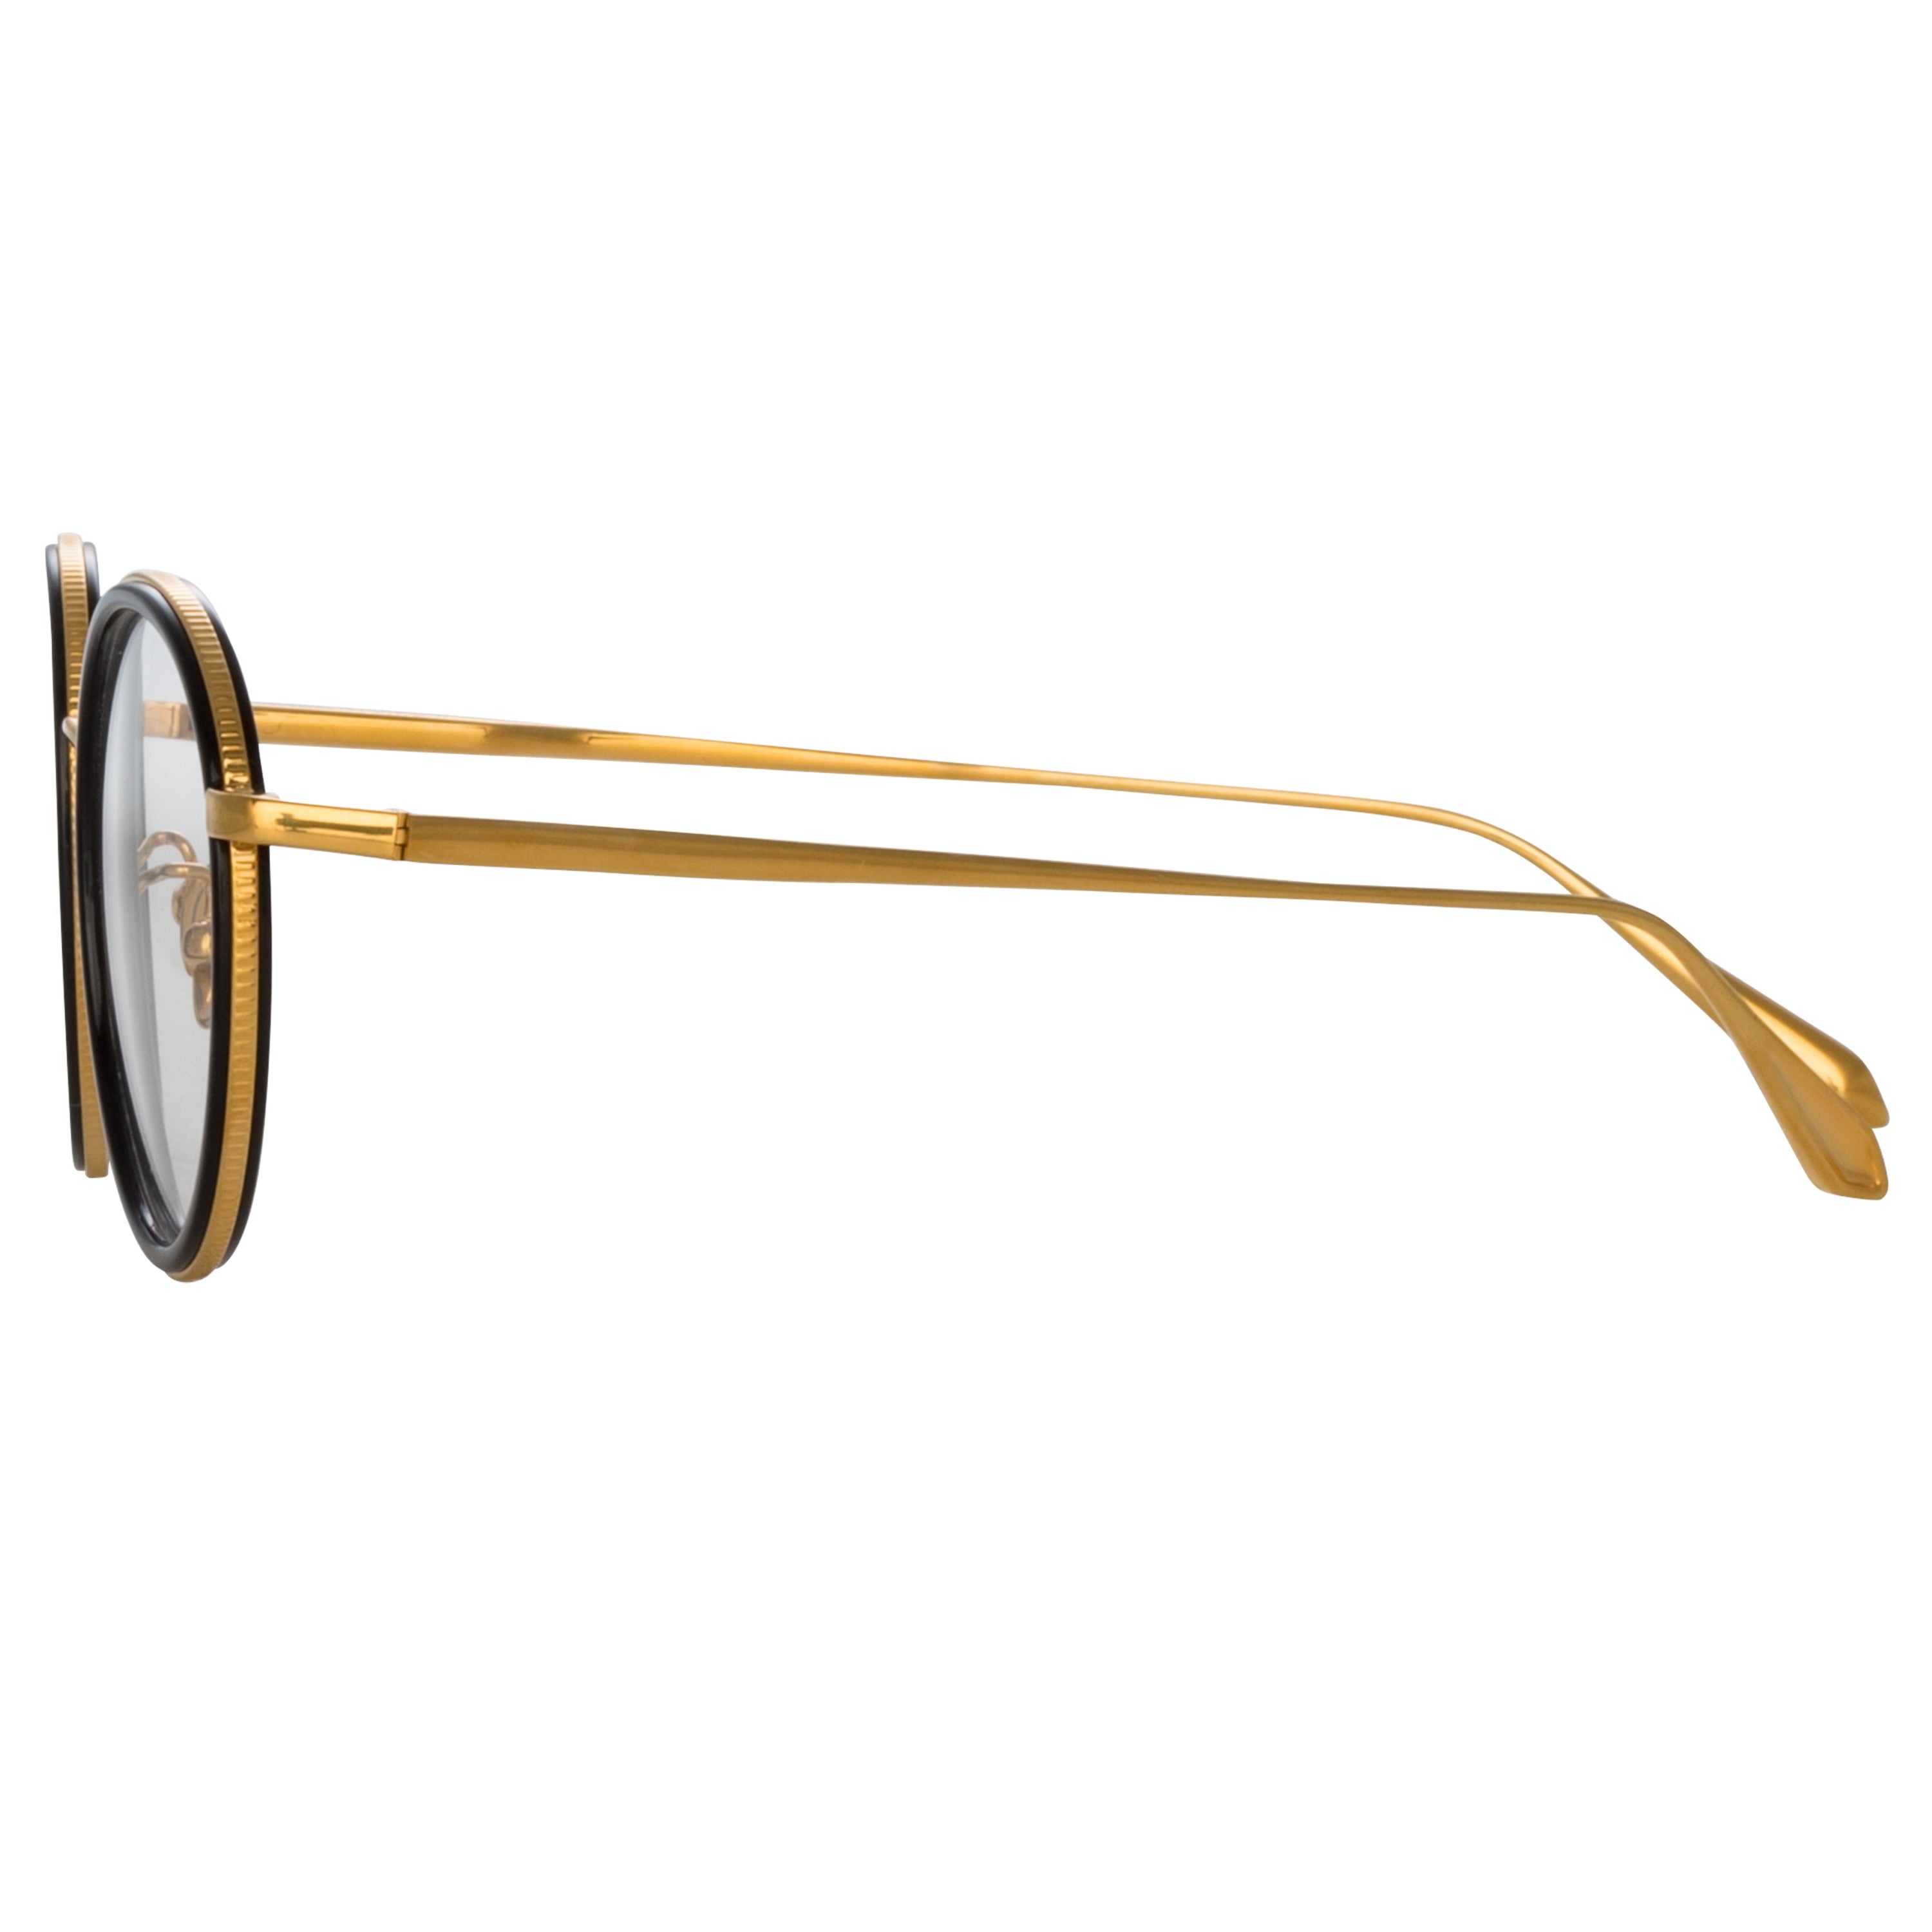 SATO OVAL OPTICAL FRAME IN YELLOW GOLD - 3